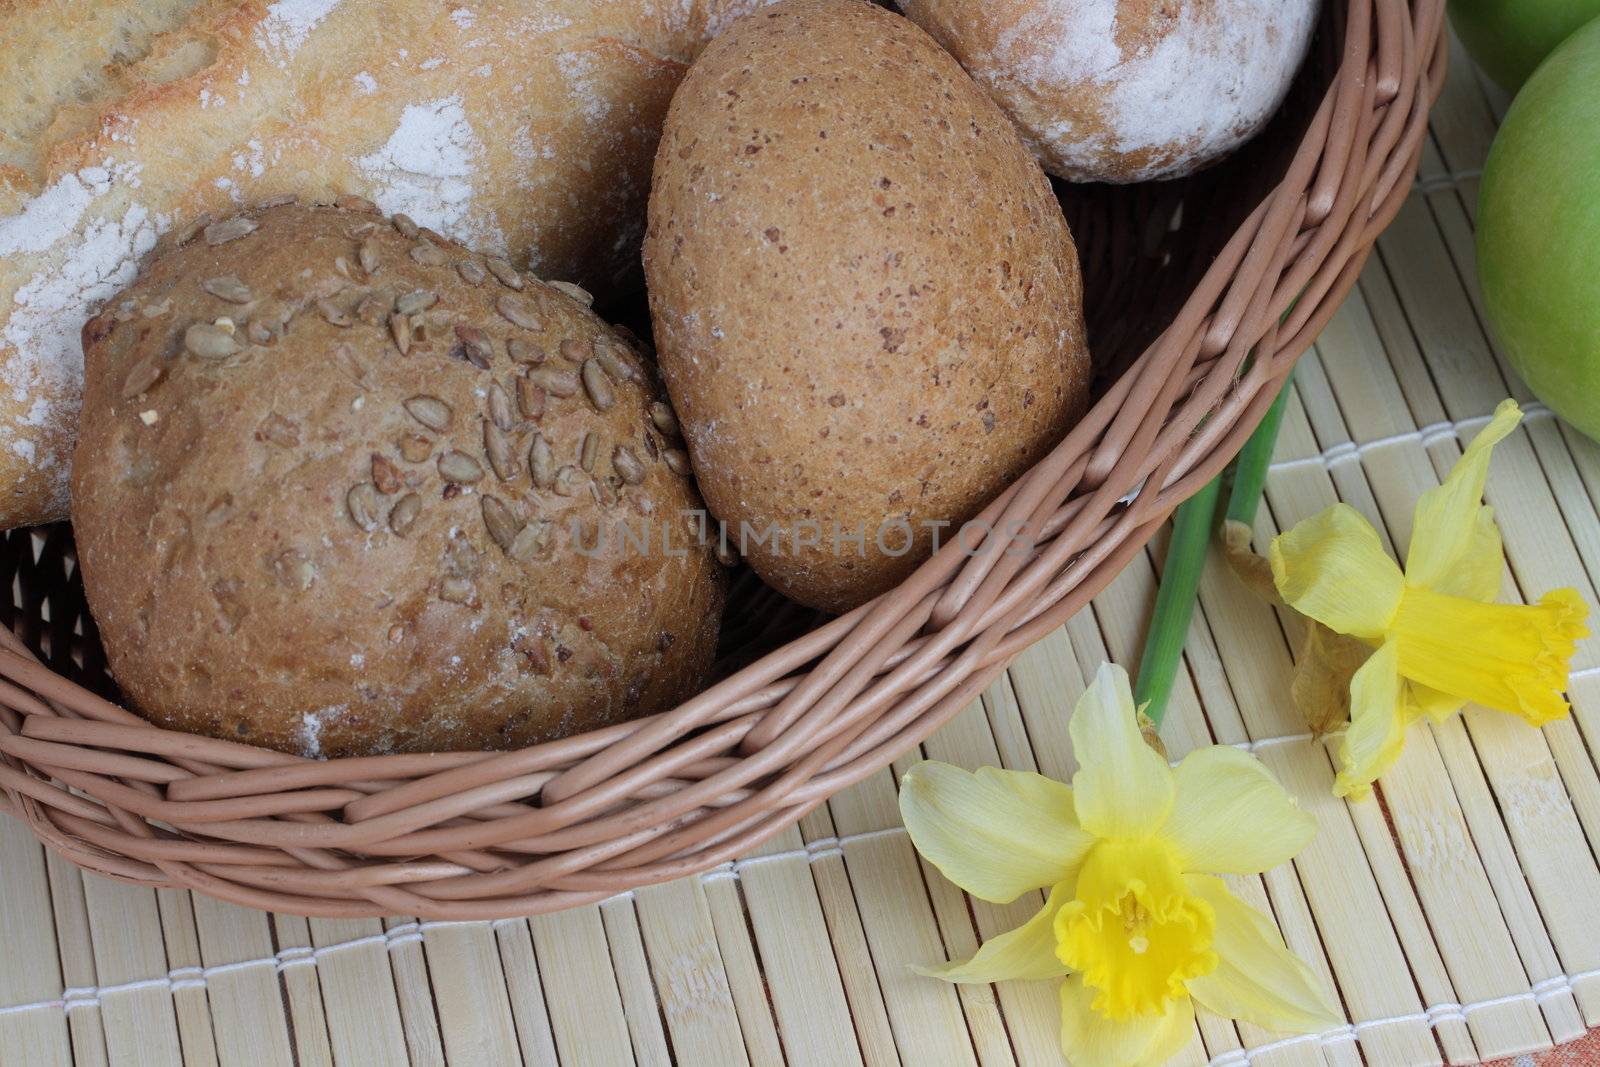 Basket of various fresh baked bread on wooden table by BDS